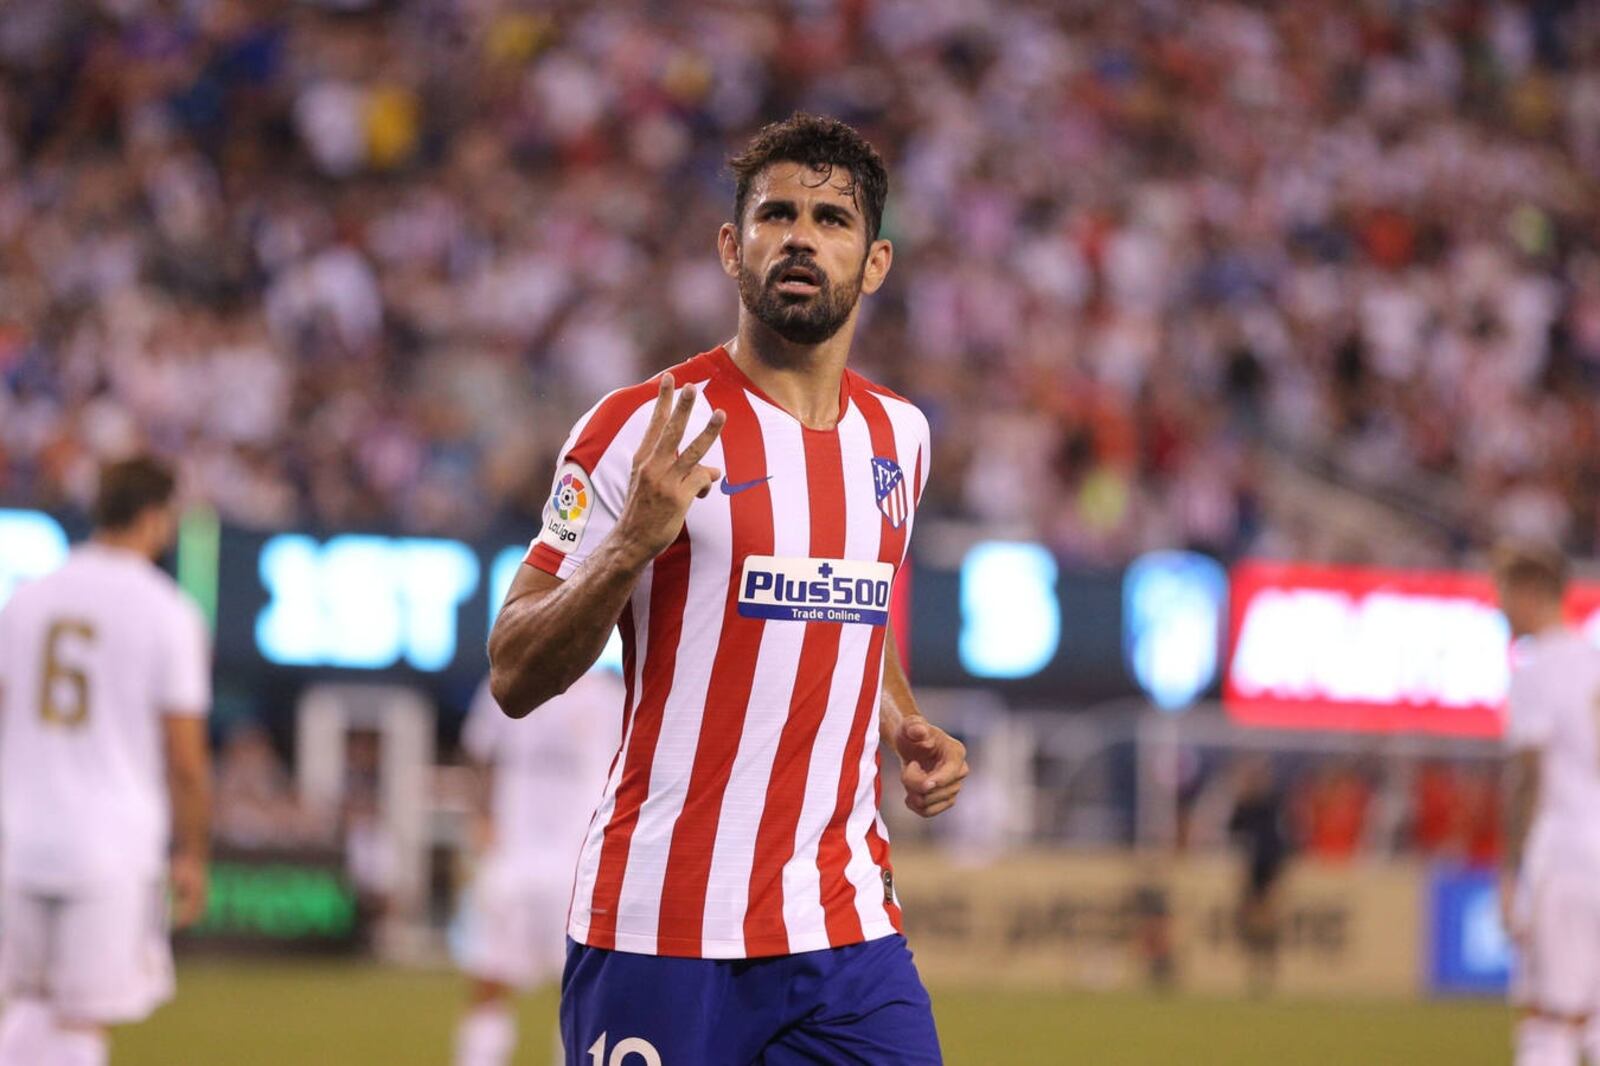 Premier League is calling Diego Costa back and his career could be saved